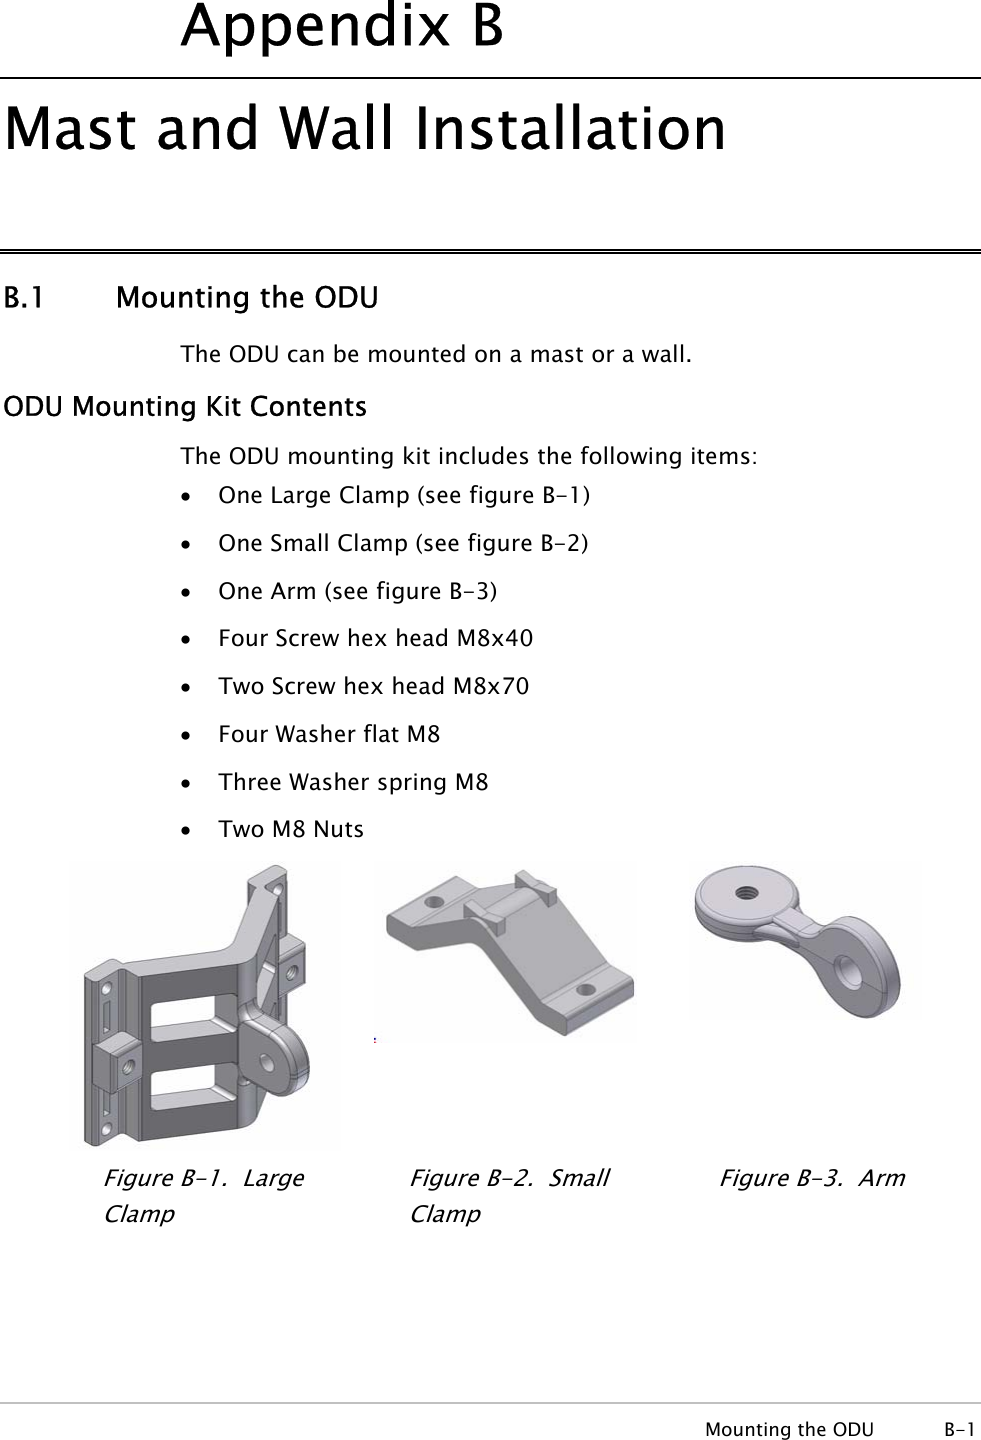 Appendix  B Mast and Wall Installation B.1 Mounting the ODU The ODU can be mounted on a mast or a wall. ODU Mounting Kit Contents The ODU mounting kit includes the following items: • One Large Clamp (see figure B-1) • One Small Clamp (see figure B-2) • One Arm (see figure B-3) • Four Screw hex head M8x40 • Two Screw hex head M8x70 • Four Washer flat M8 • Three Washer spring M8 • Two M8 Nuts   Figure  B-1.  Large Clamp Figure  B-2.  Small Clamp Figure  B-3.  Arm  Mounting the ODU  B-1 